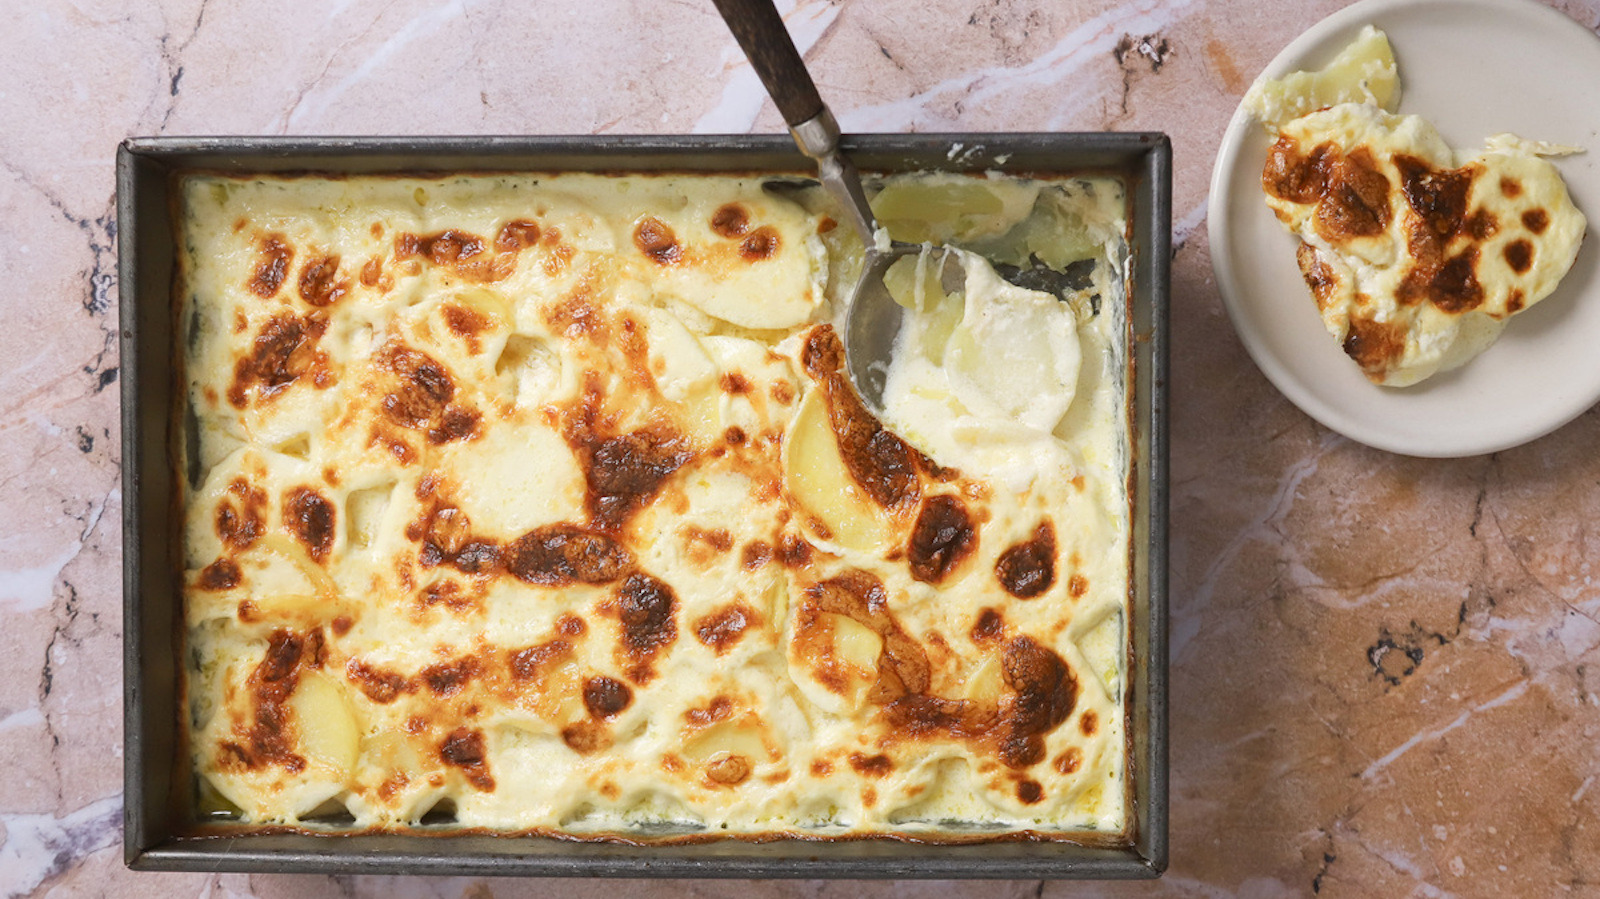 Gruyère Is The Rich, Salty Cheese You Need To Elevate Scalloped Potatoes